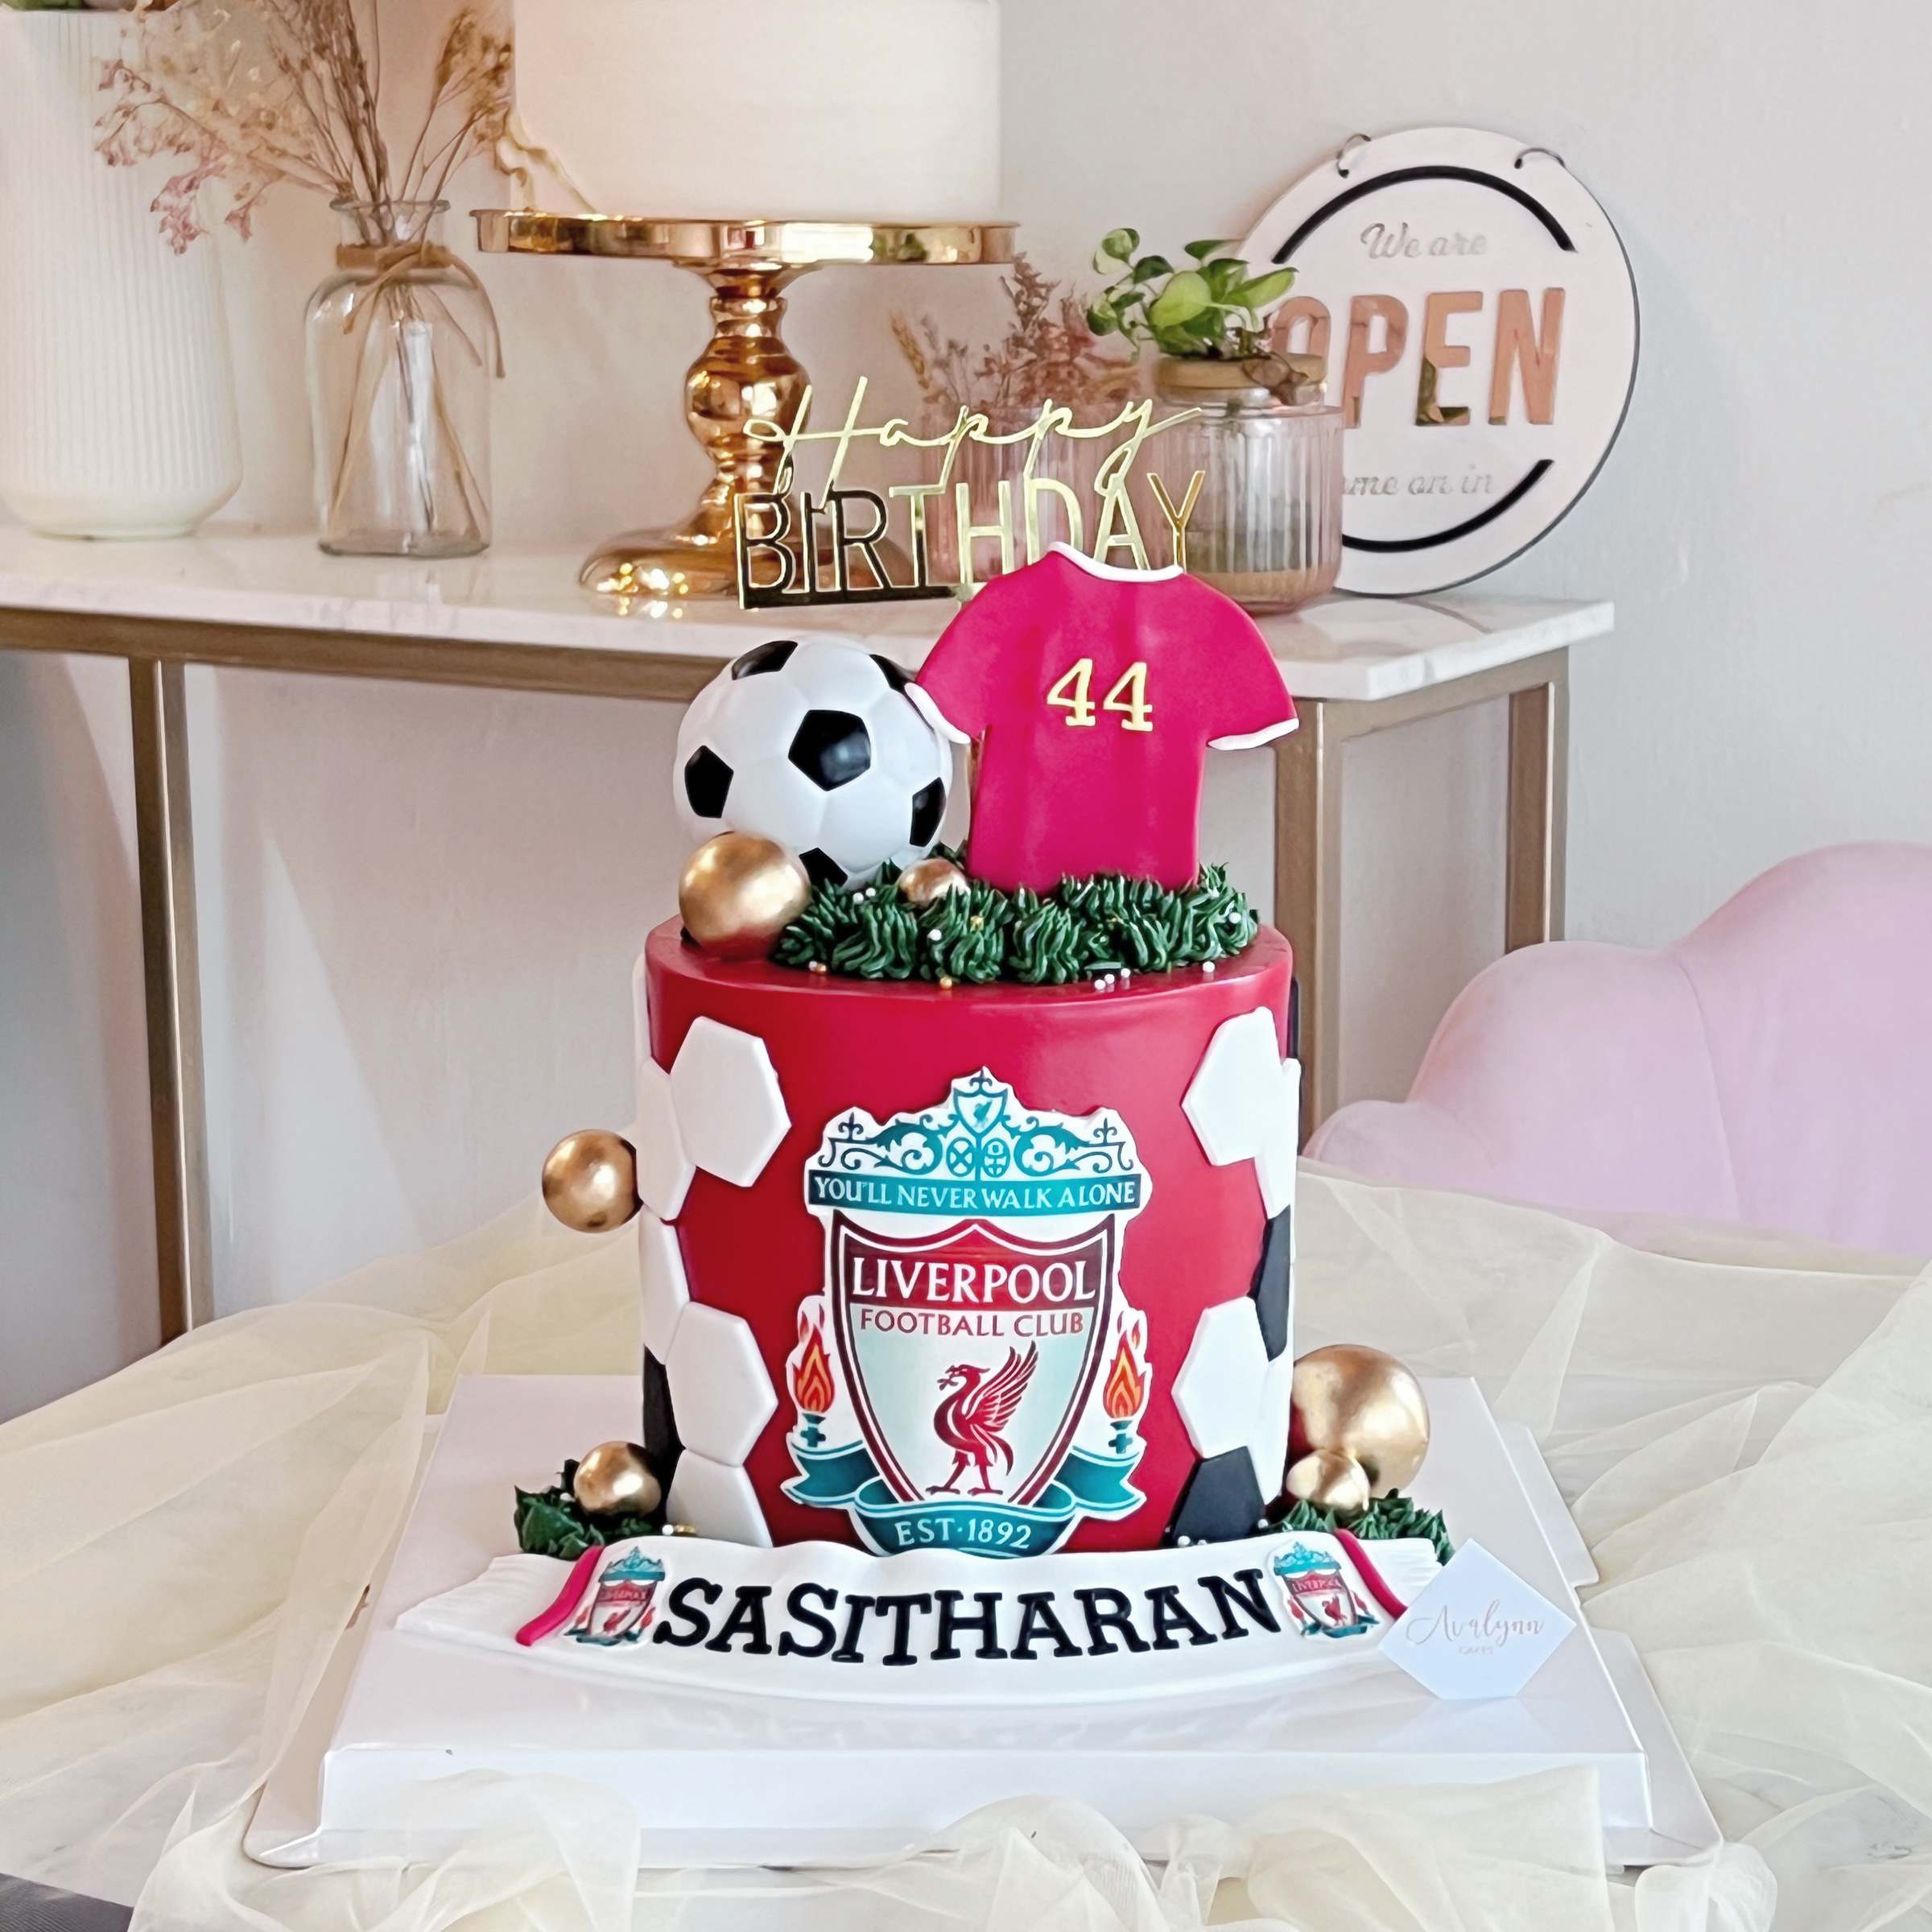 Liverpool picture cake - Cherry's Delights | Facebook